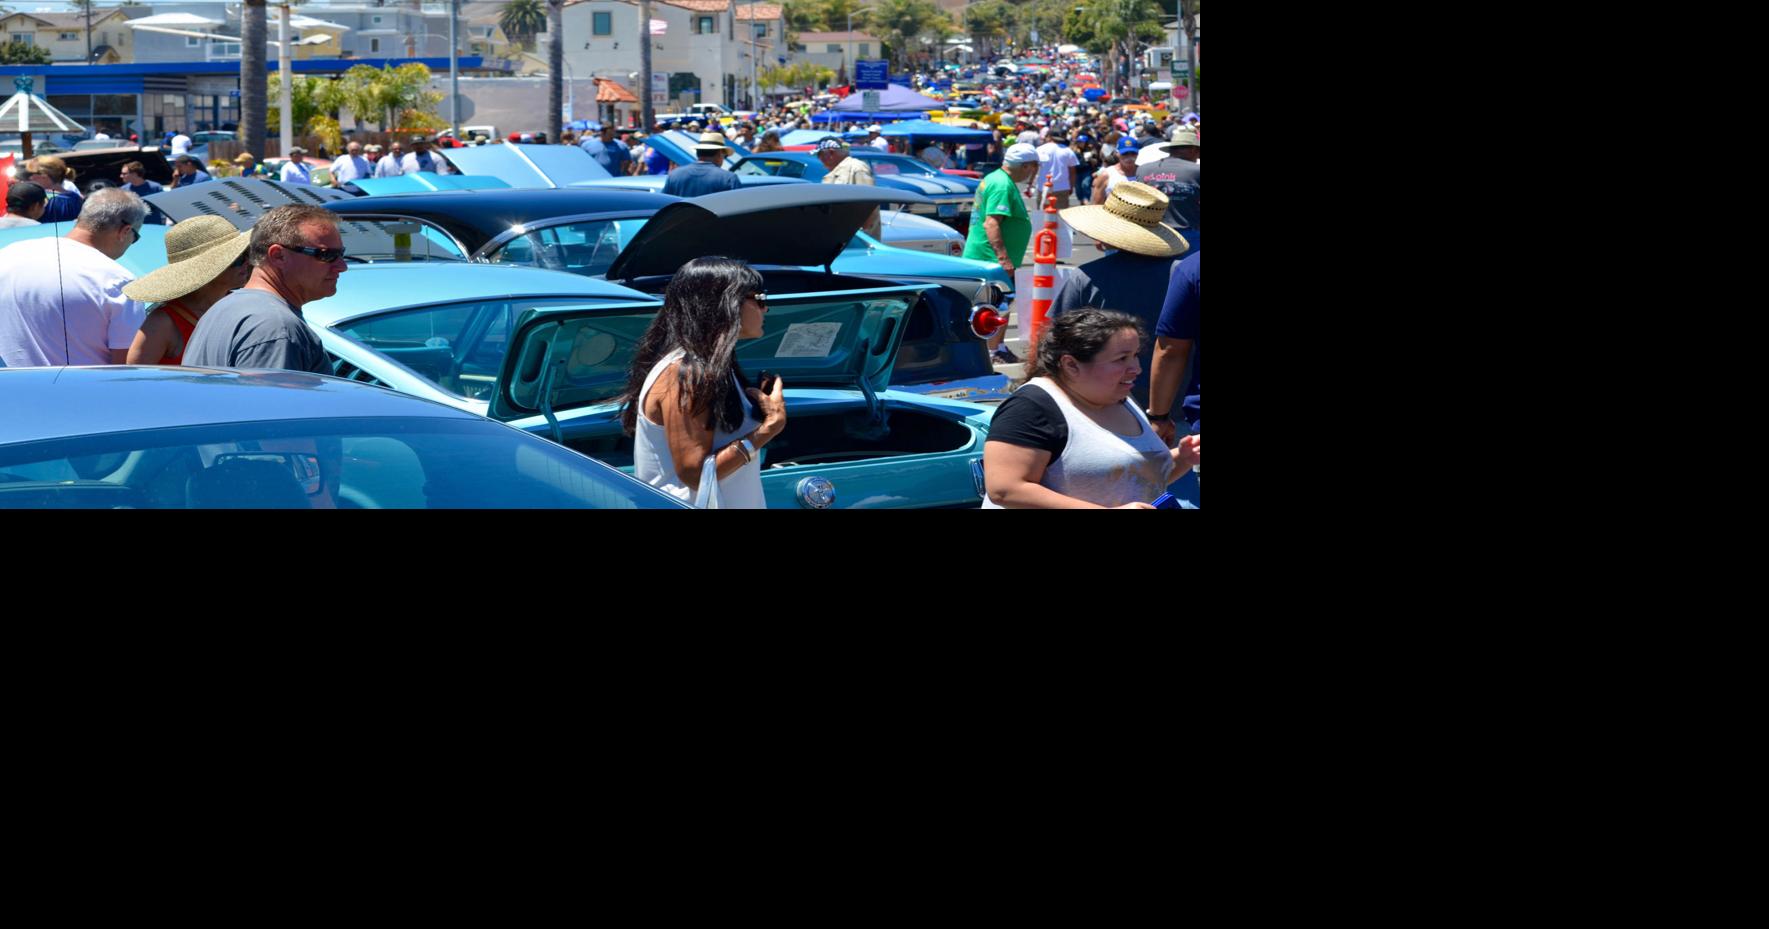 Pismo Beach car show wheels into town for weekend Local news